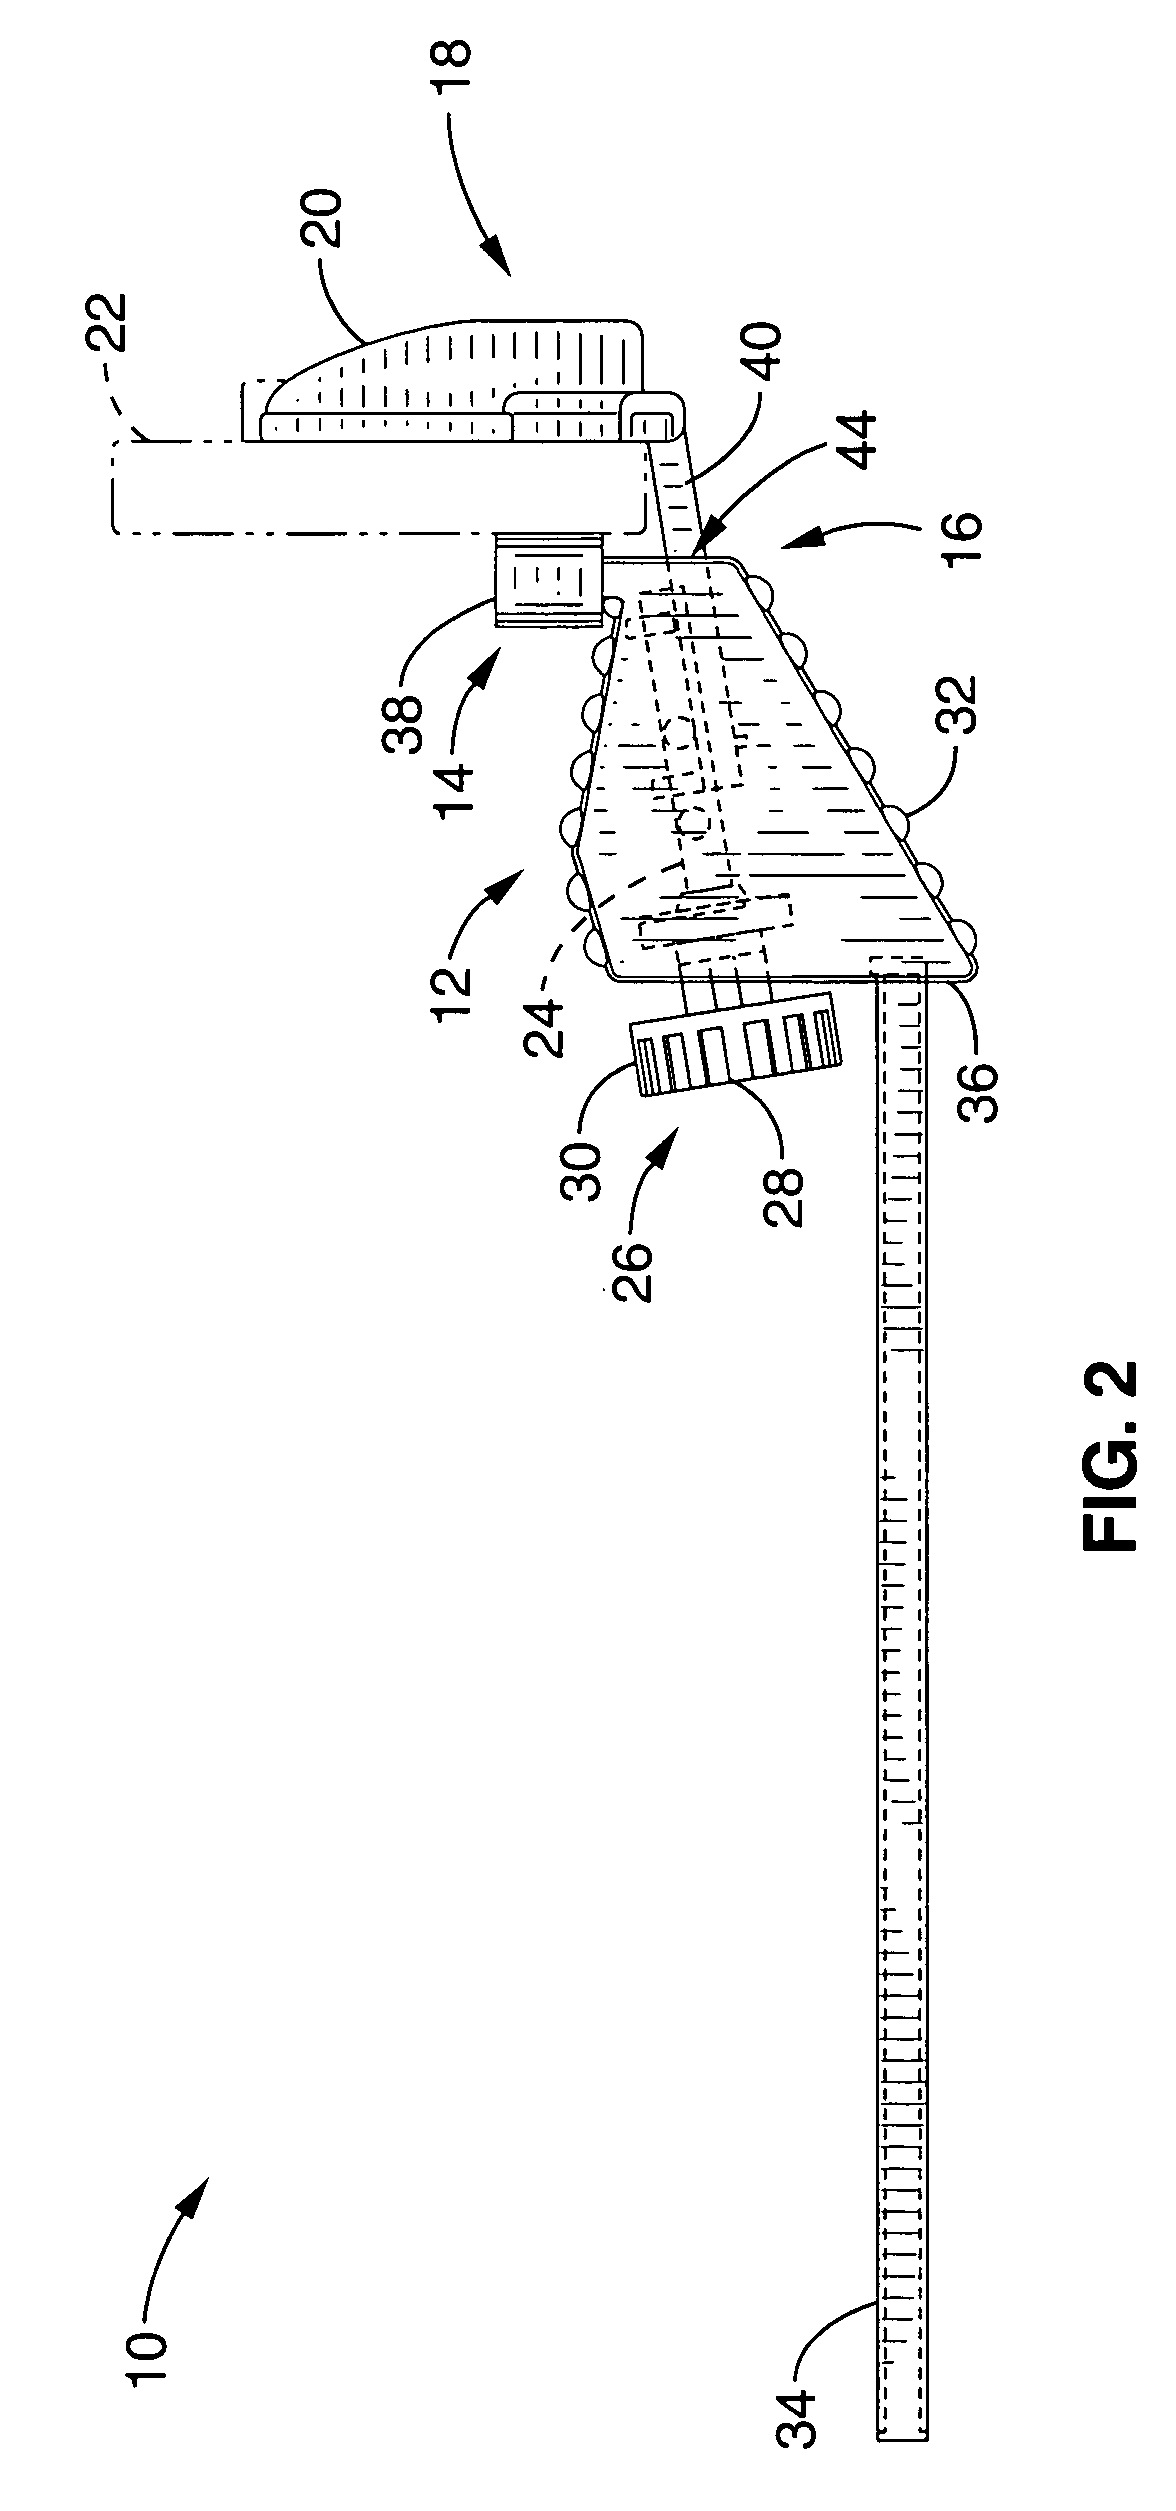 Apparatus for retaining a radiographic sensor during dental x-ray imaging